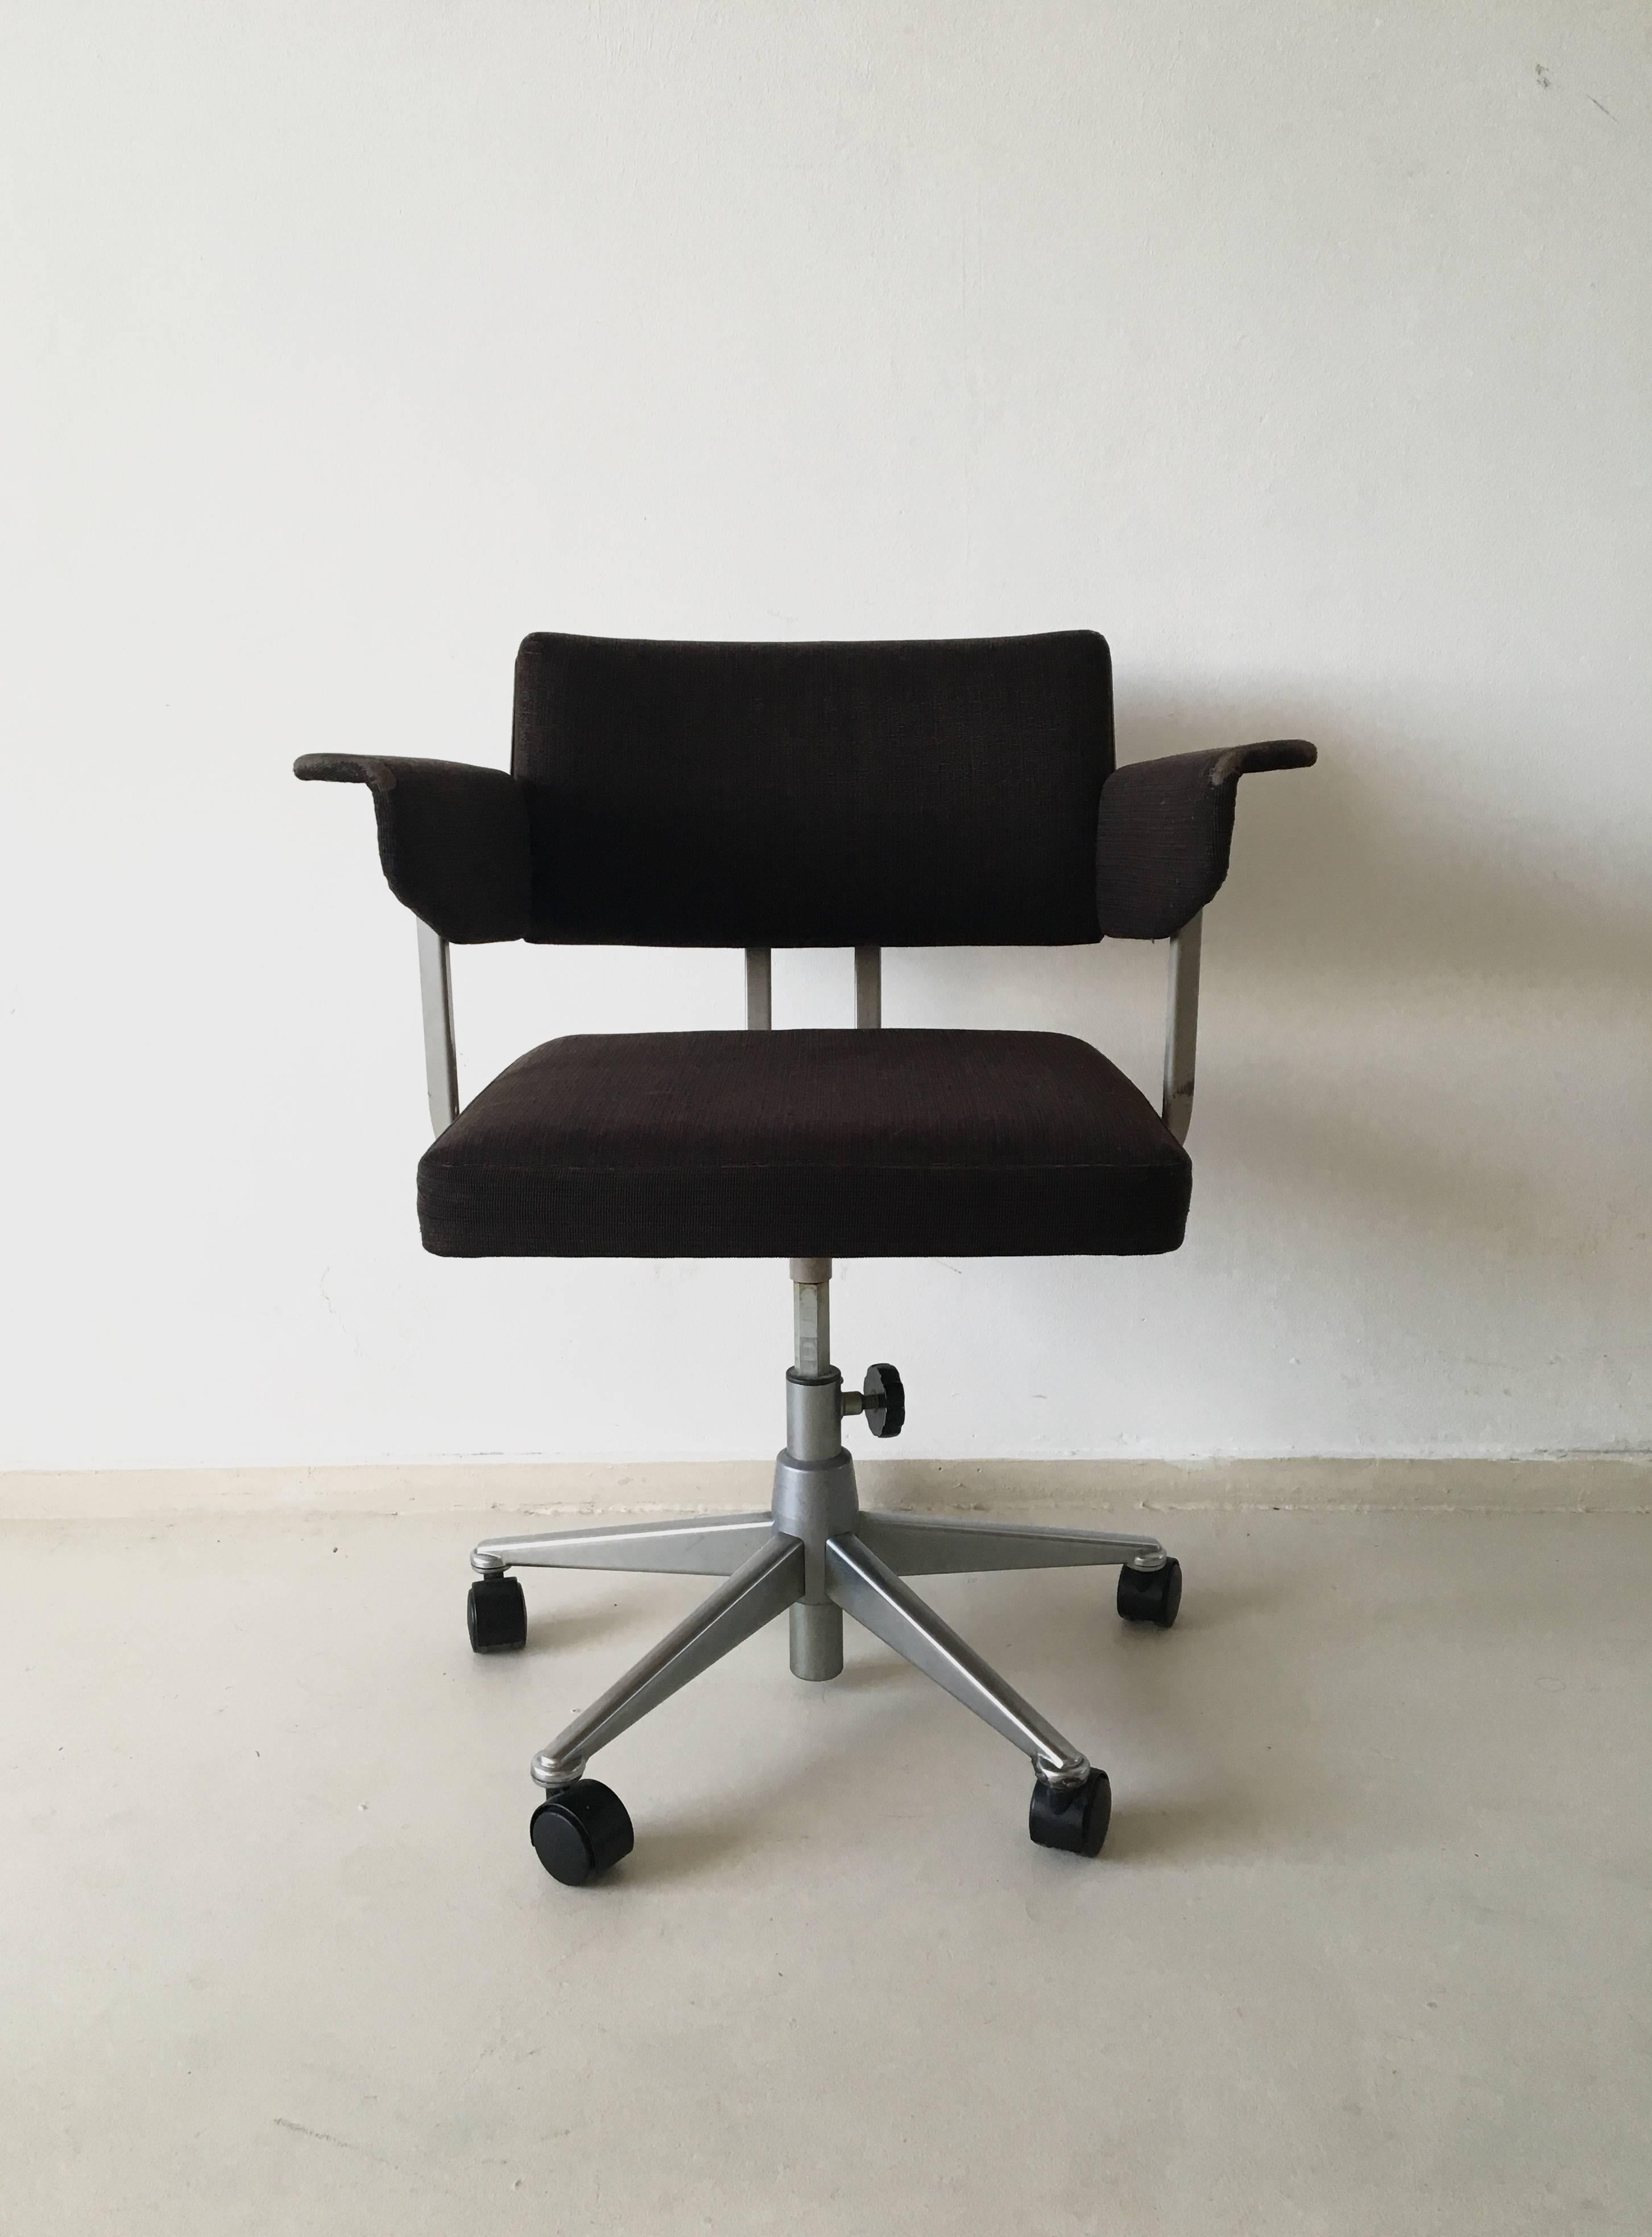 This Industrial Brutalist style swivel desk chair was designed by Friso Kramer for Ahrend de Cirkel in the Netherlands and manufactured in 1973. This chair, model Resort, is in a very good condition with a Grey metal frame and brown upholstery. It's